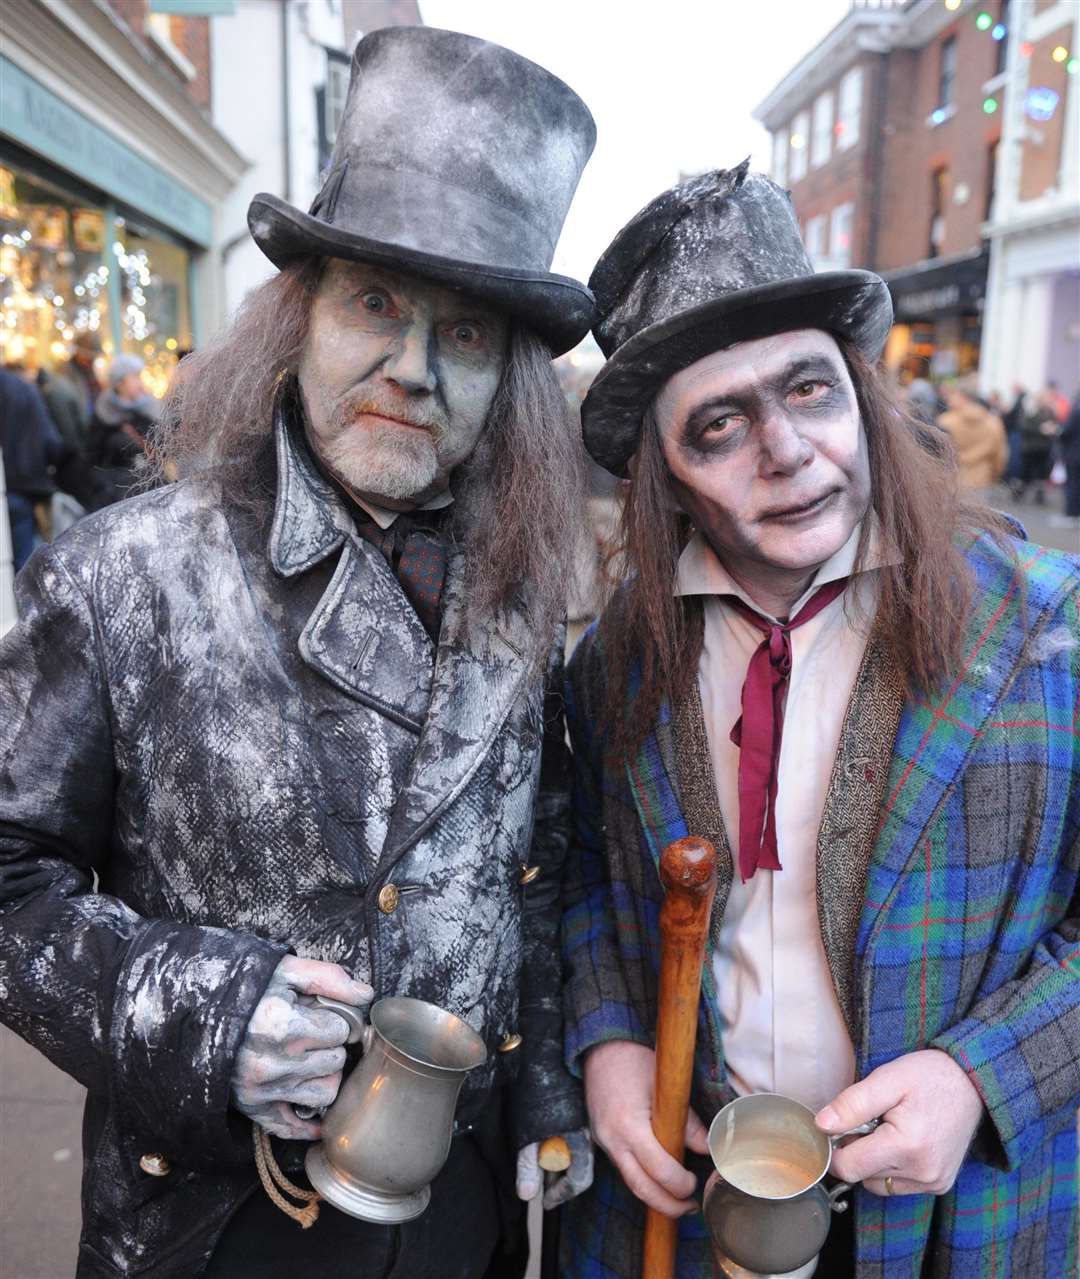 There will be costumed characters in Rochester for the Dickensian Christmas Festival Picture: Steve Crispe